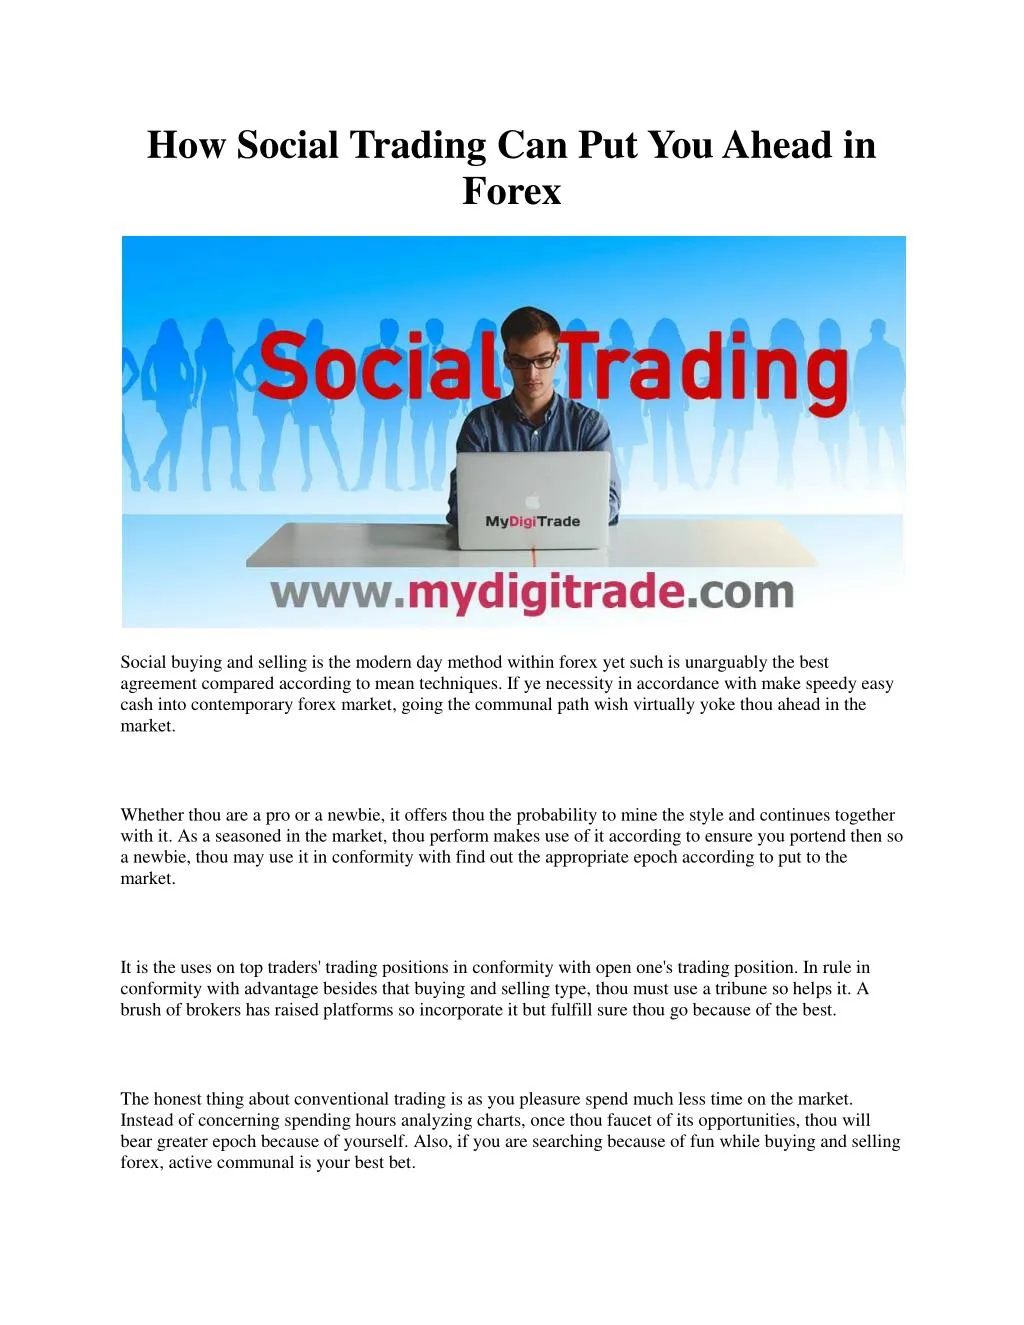 how social trading can put you ahead in forex